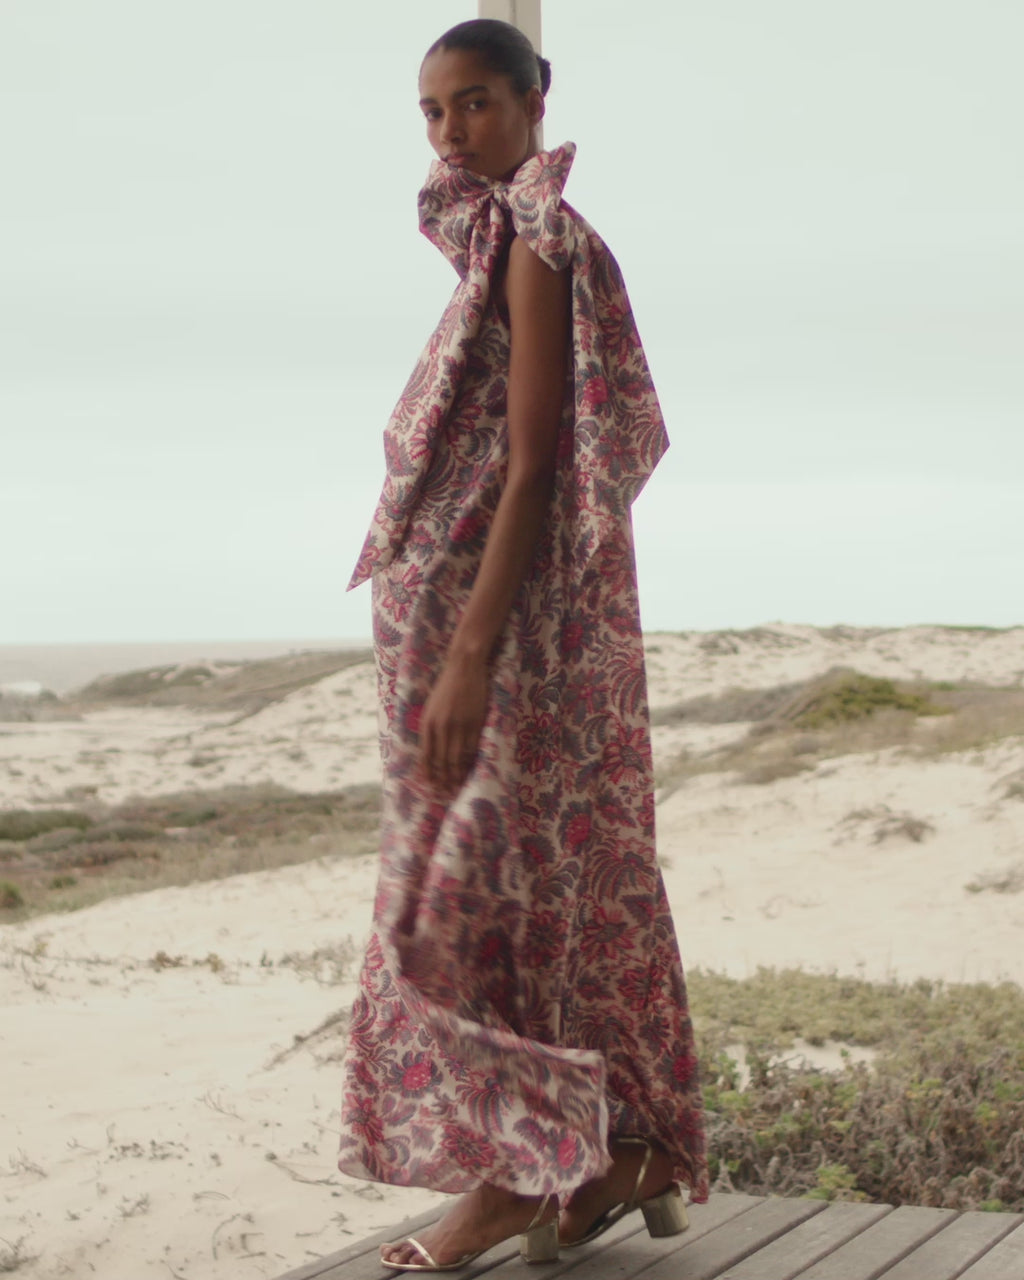 Wiggy Kit | Bay Dress (Pink Jungle Print) | Model wearing one-shoulder maxi dress in jungle print, with beach in background